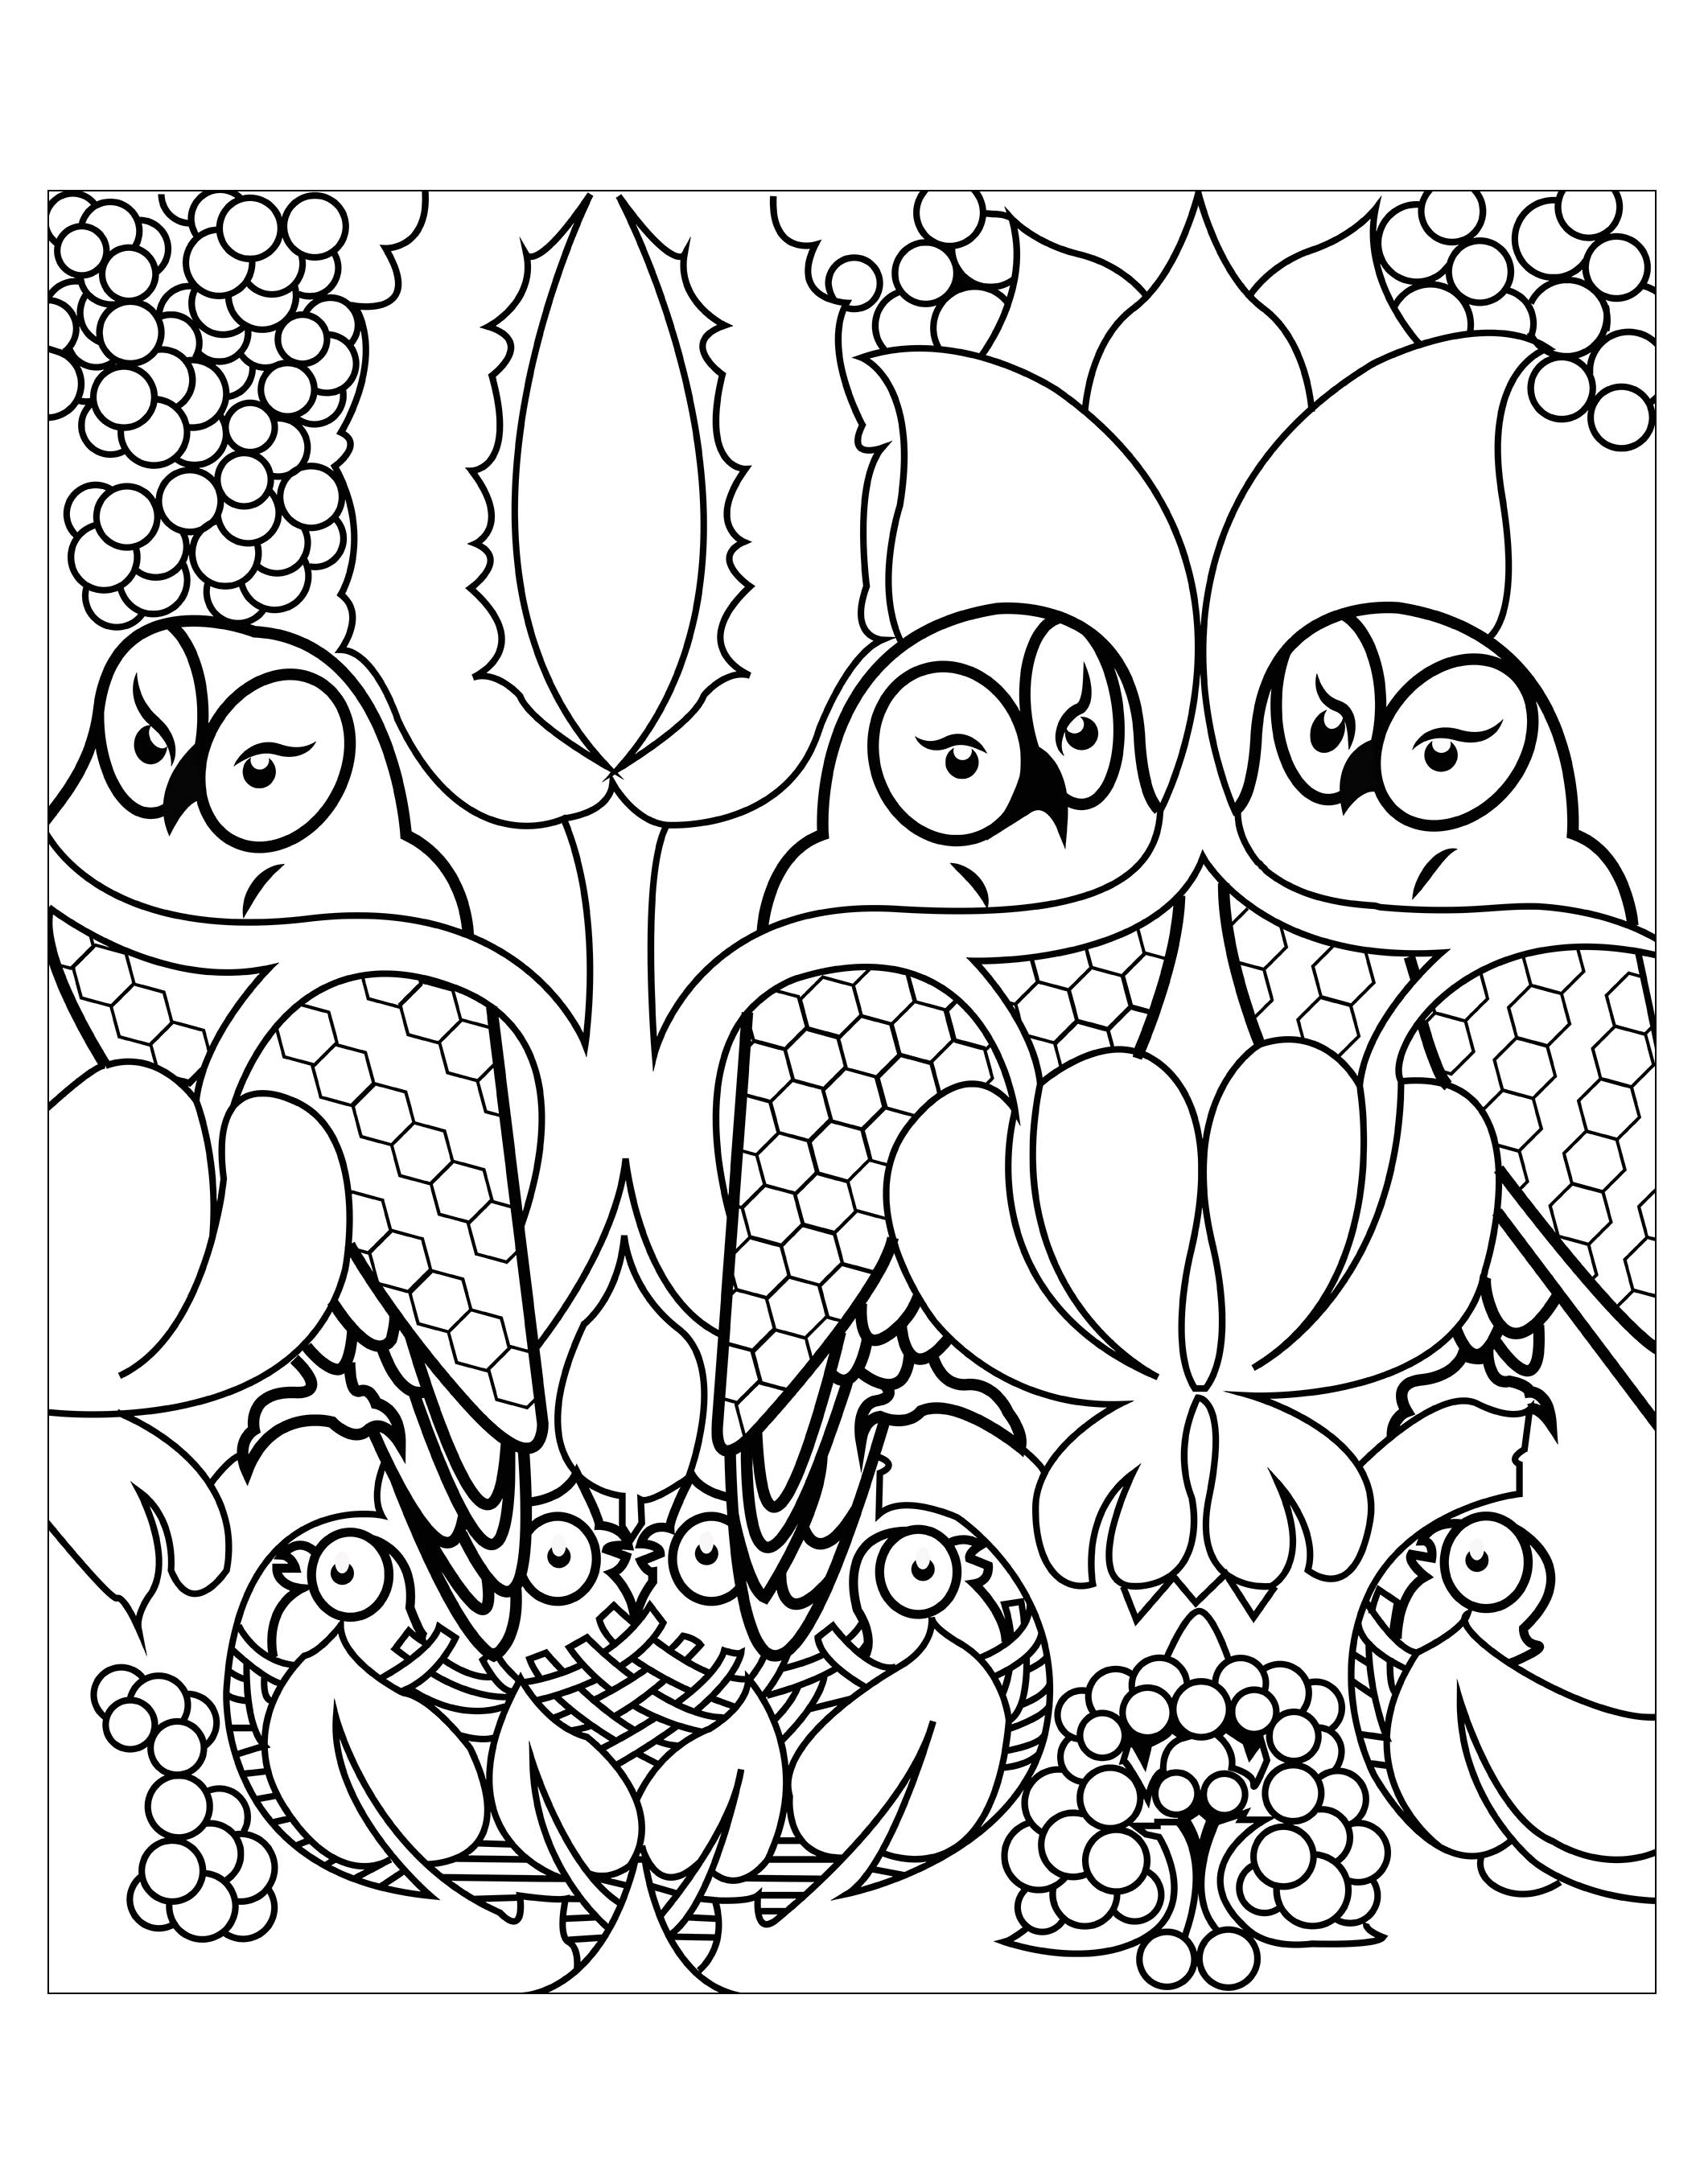 Coloring page inspired by a textile design (CFA Voysey, England, 1897)